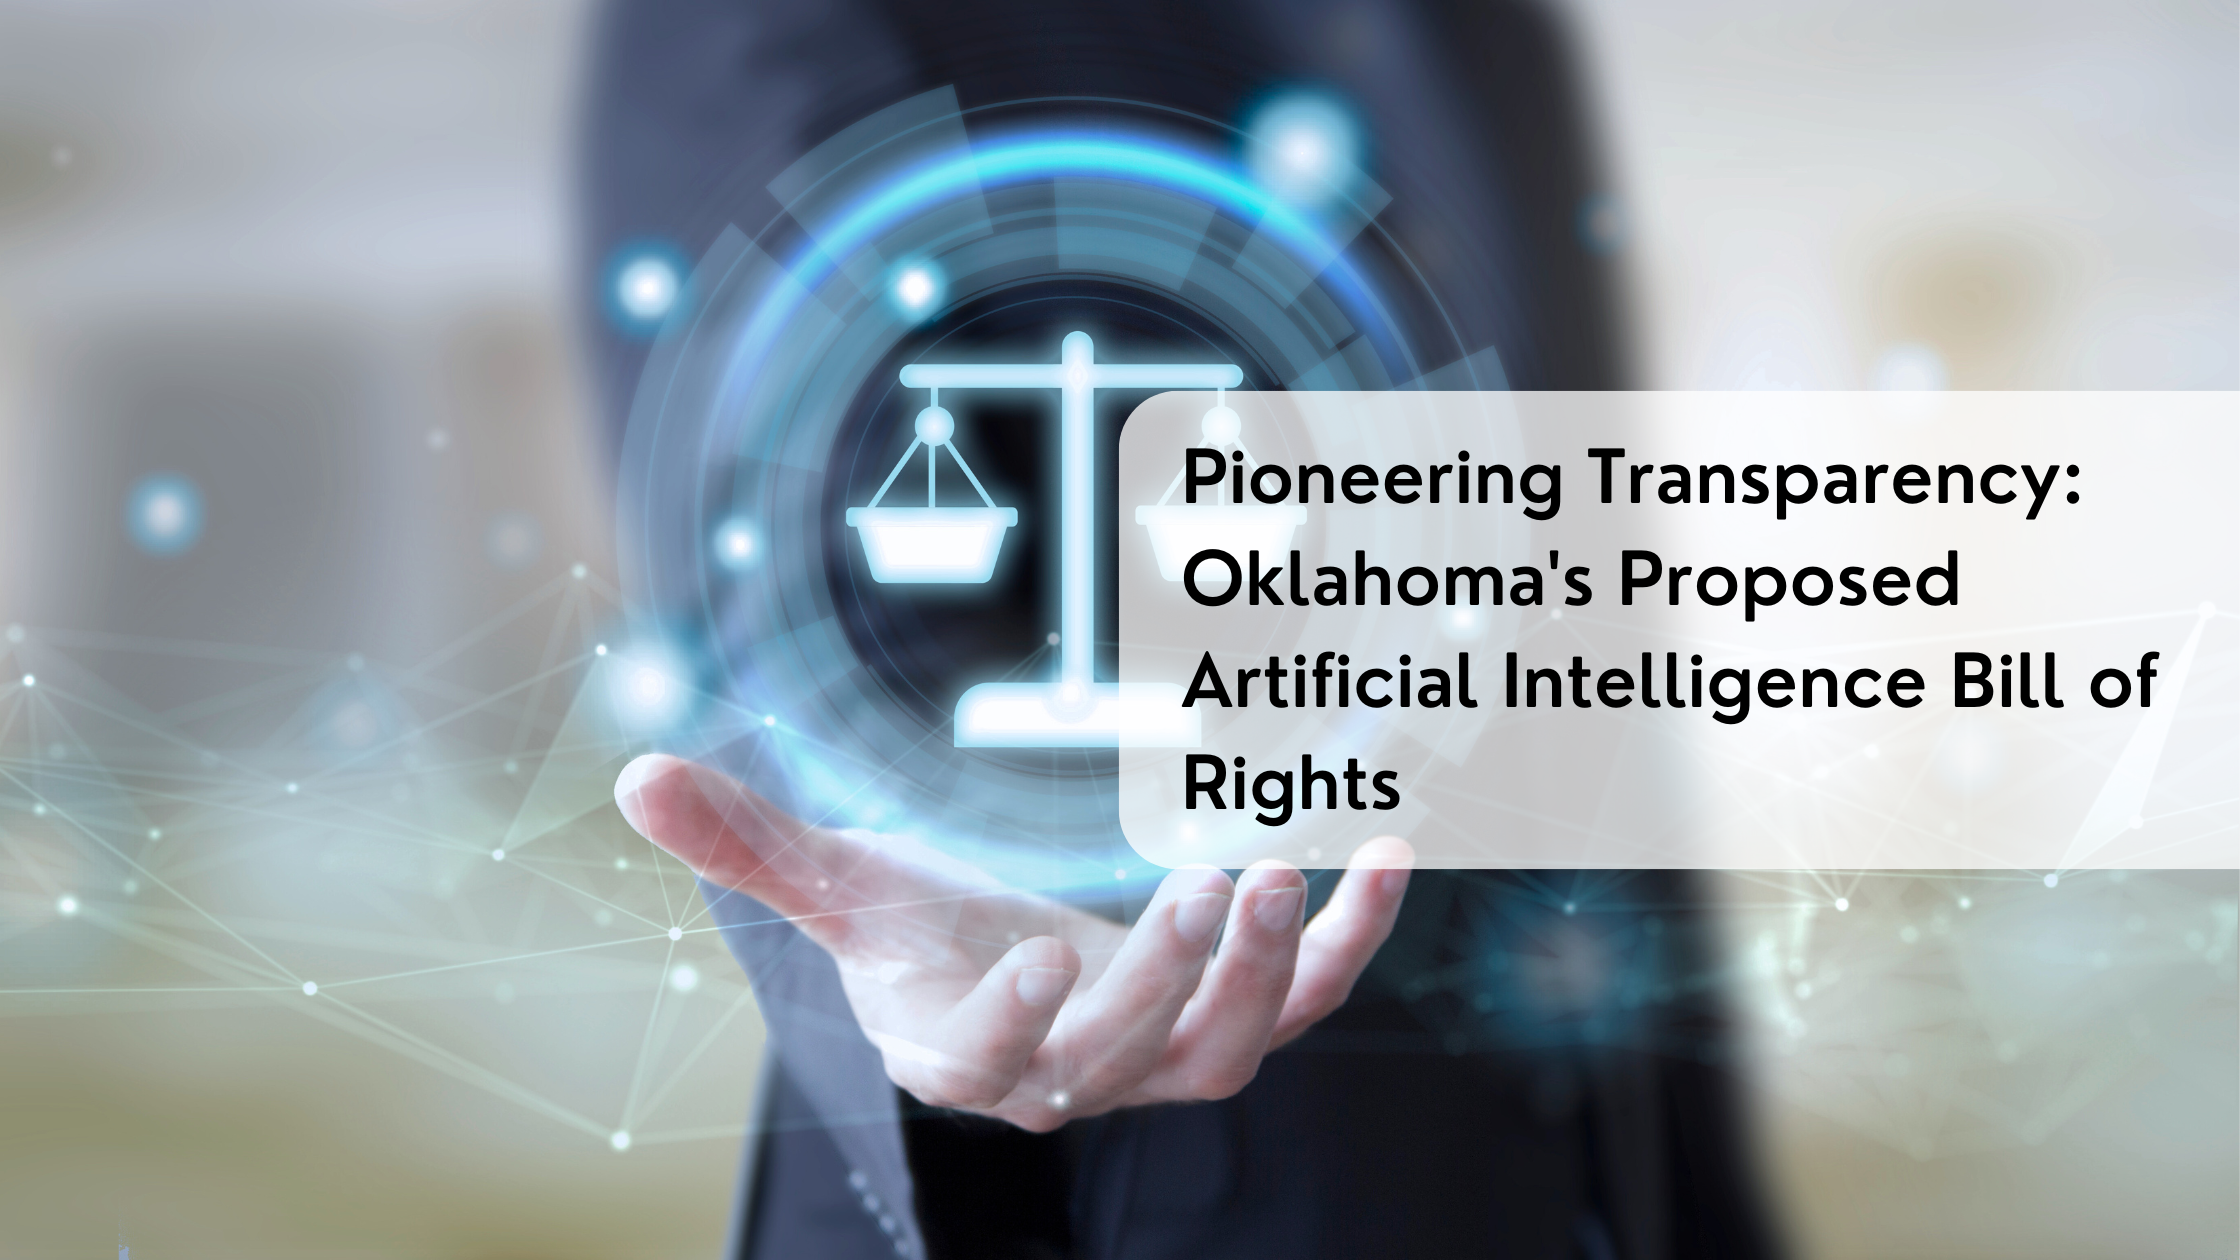 Pioneering Transparency: Oklahoma's Proposed Artificial Intelligence Bill of Rights